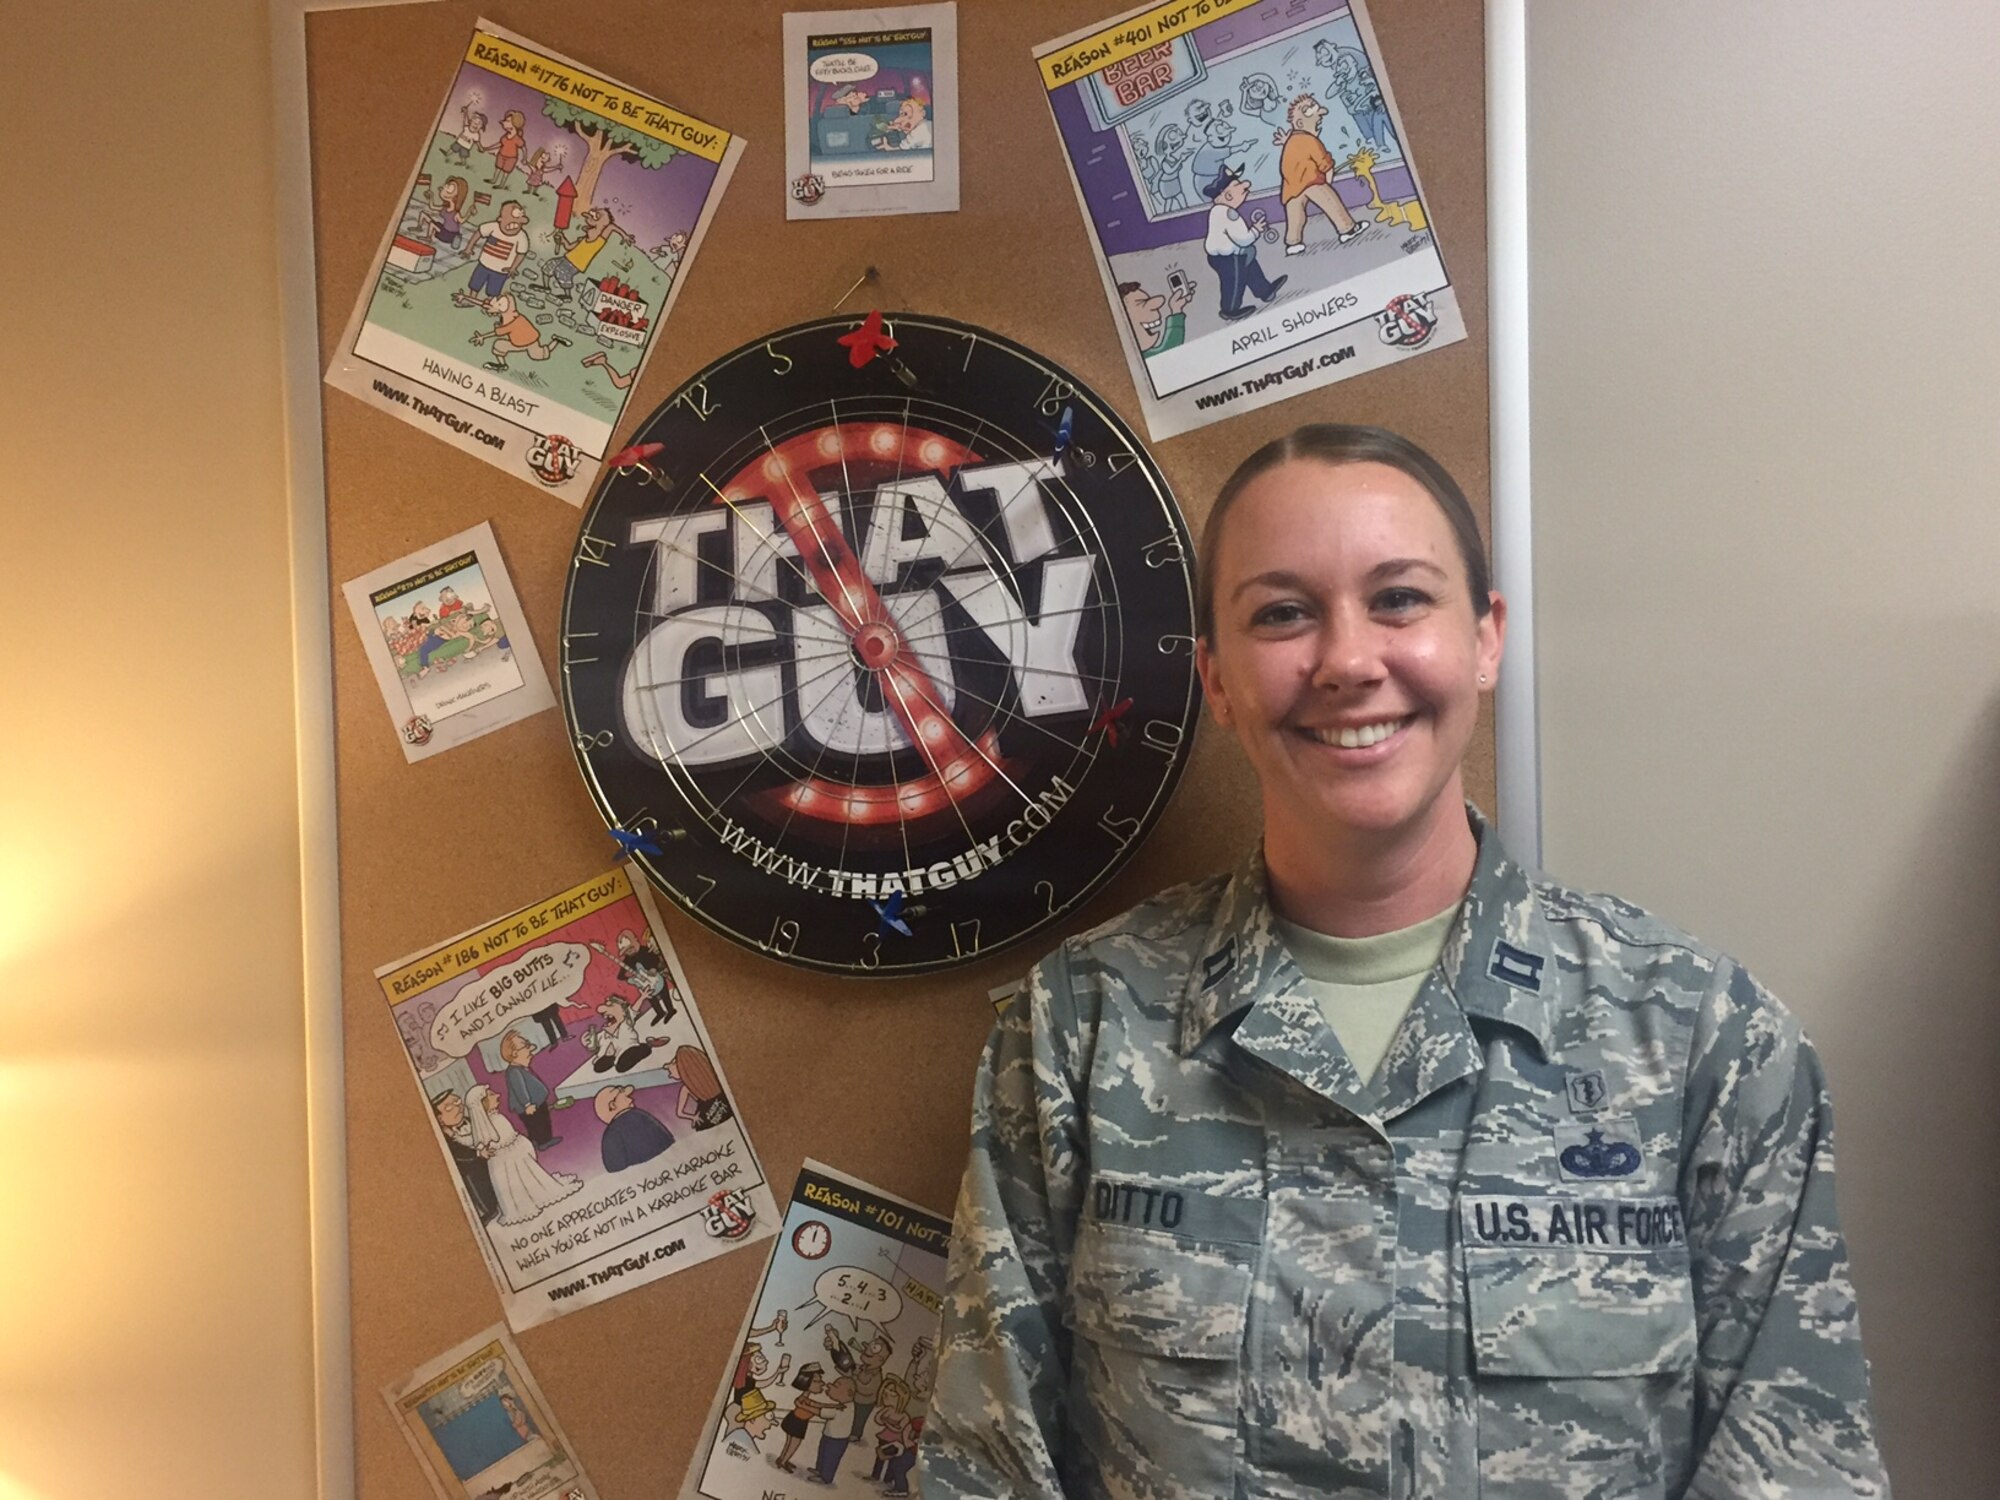 Capt. Crystal Ditto, licensed clinical social worker, Alcohol and Drug Abuse Prevention and Treatment Program manager and Intensive Outpatient Program manager at Wright-Patterson Air Force Base, offers healthy ways to cope with stress. “That Guy” is the Department of Defense’s resource for responsible drinking for military service members. (Skywrighter photo/Amy Rollins)